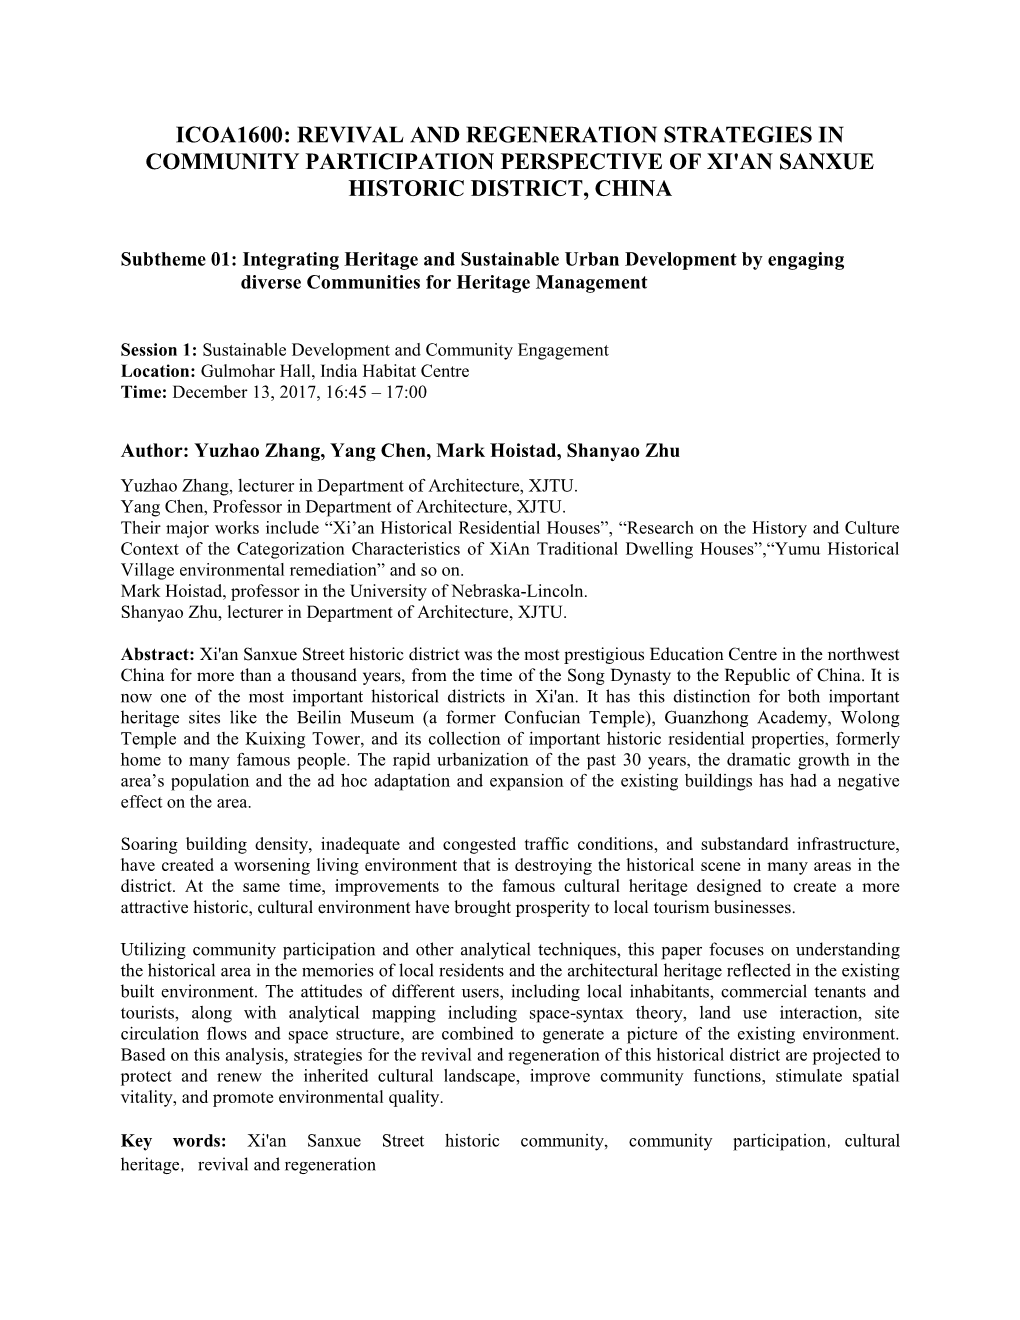 Revival and Regeneration Strategies in Community Participation Perspective of Xi'an Sanxue Historic District, China